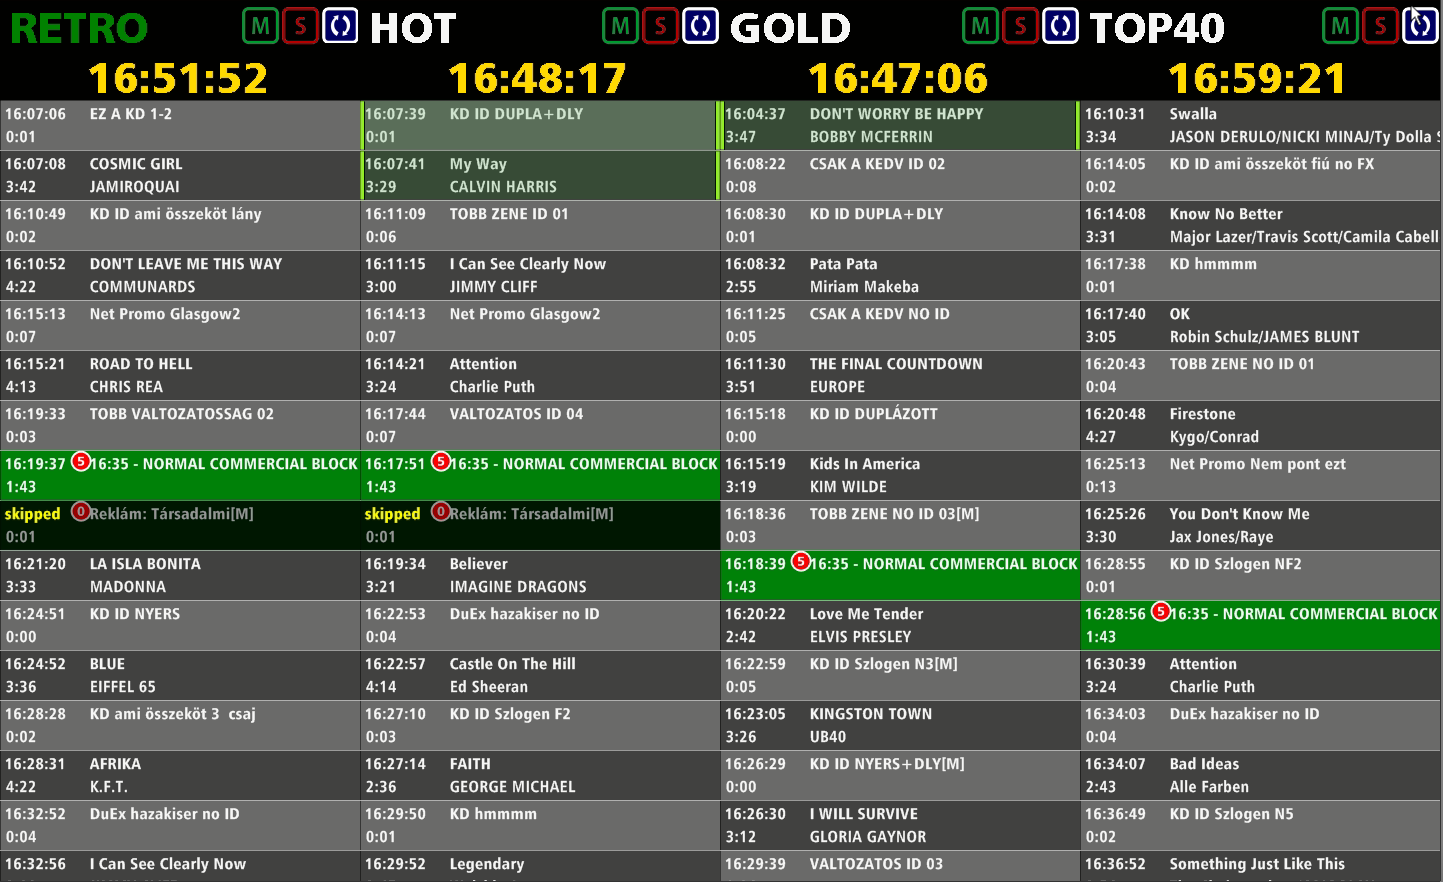 Selector screen for controlling multiple shows